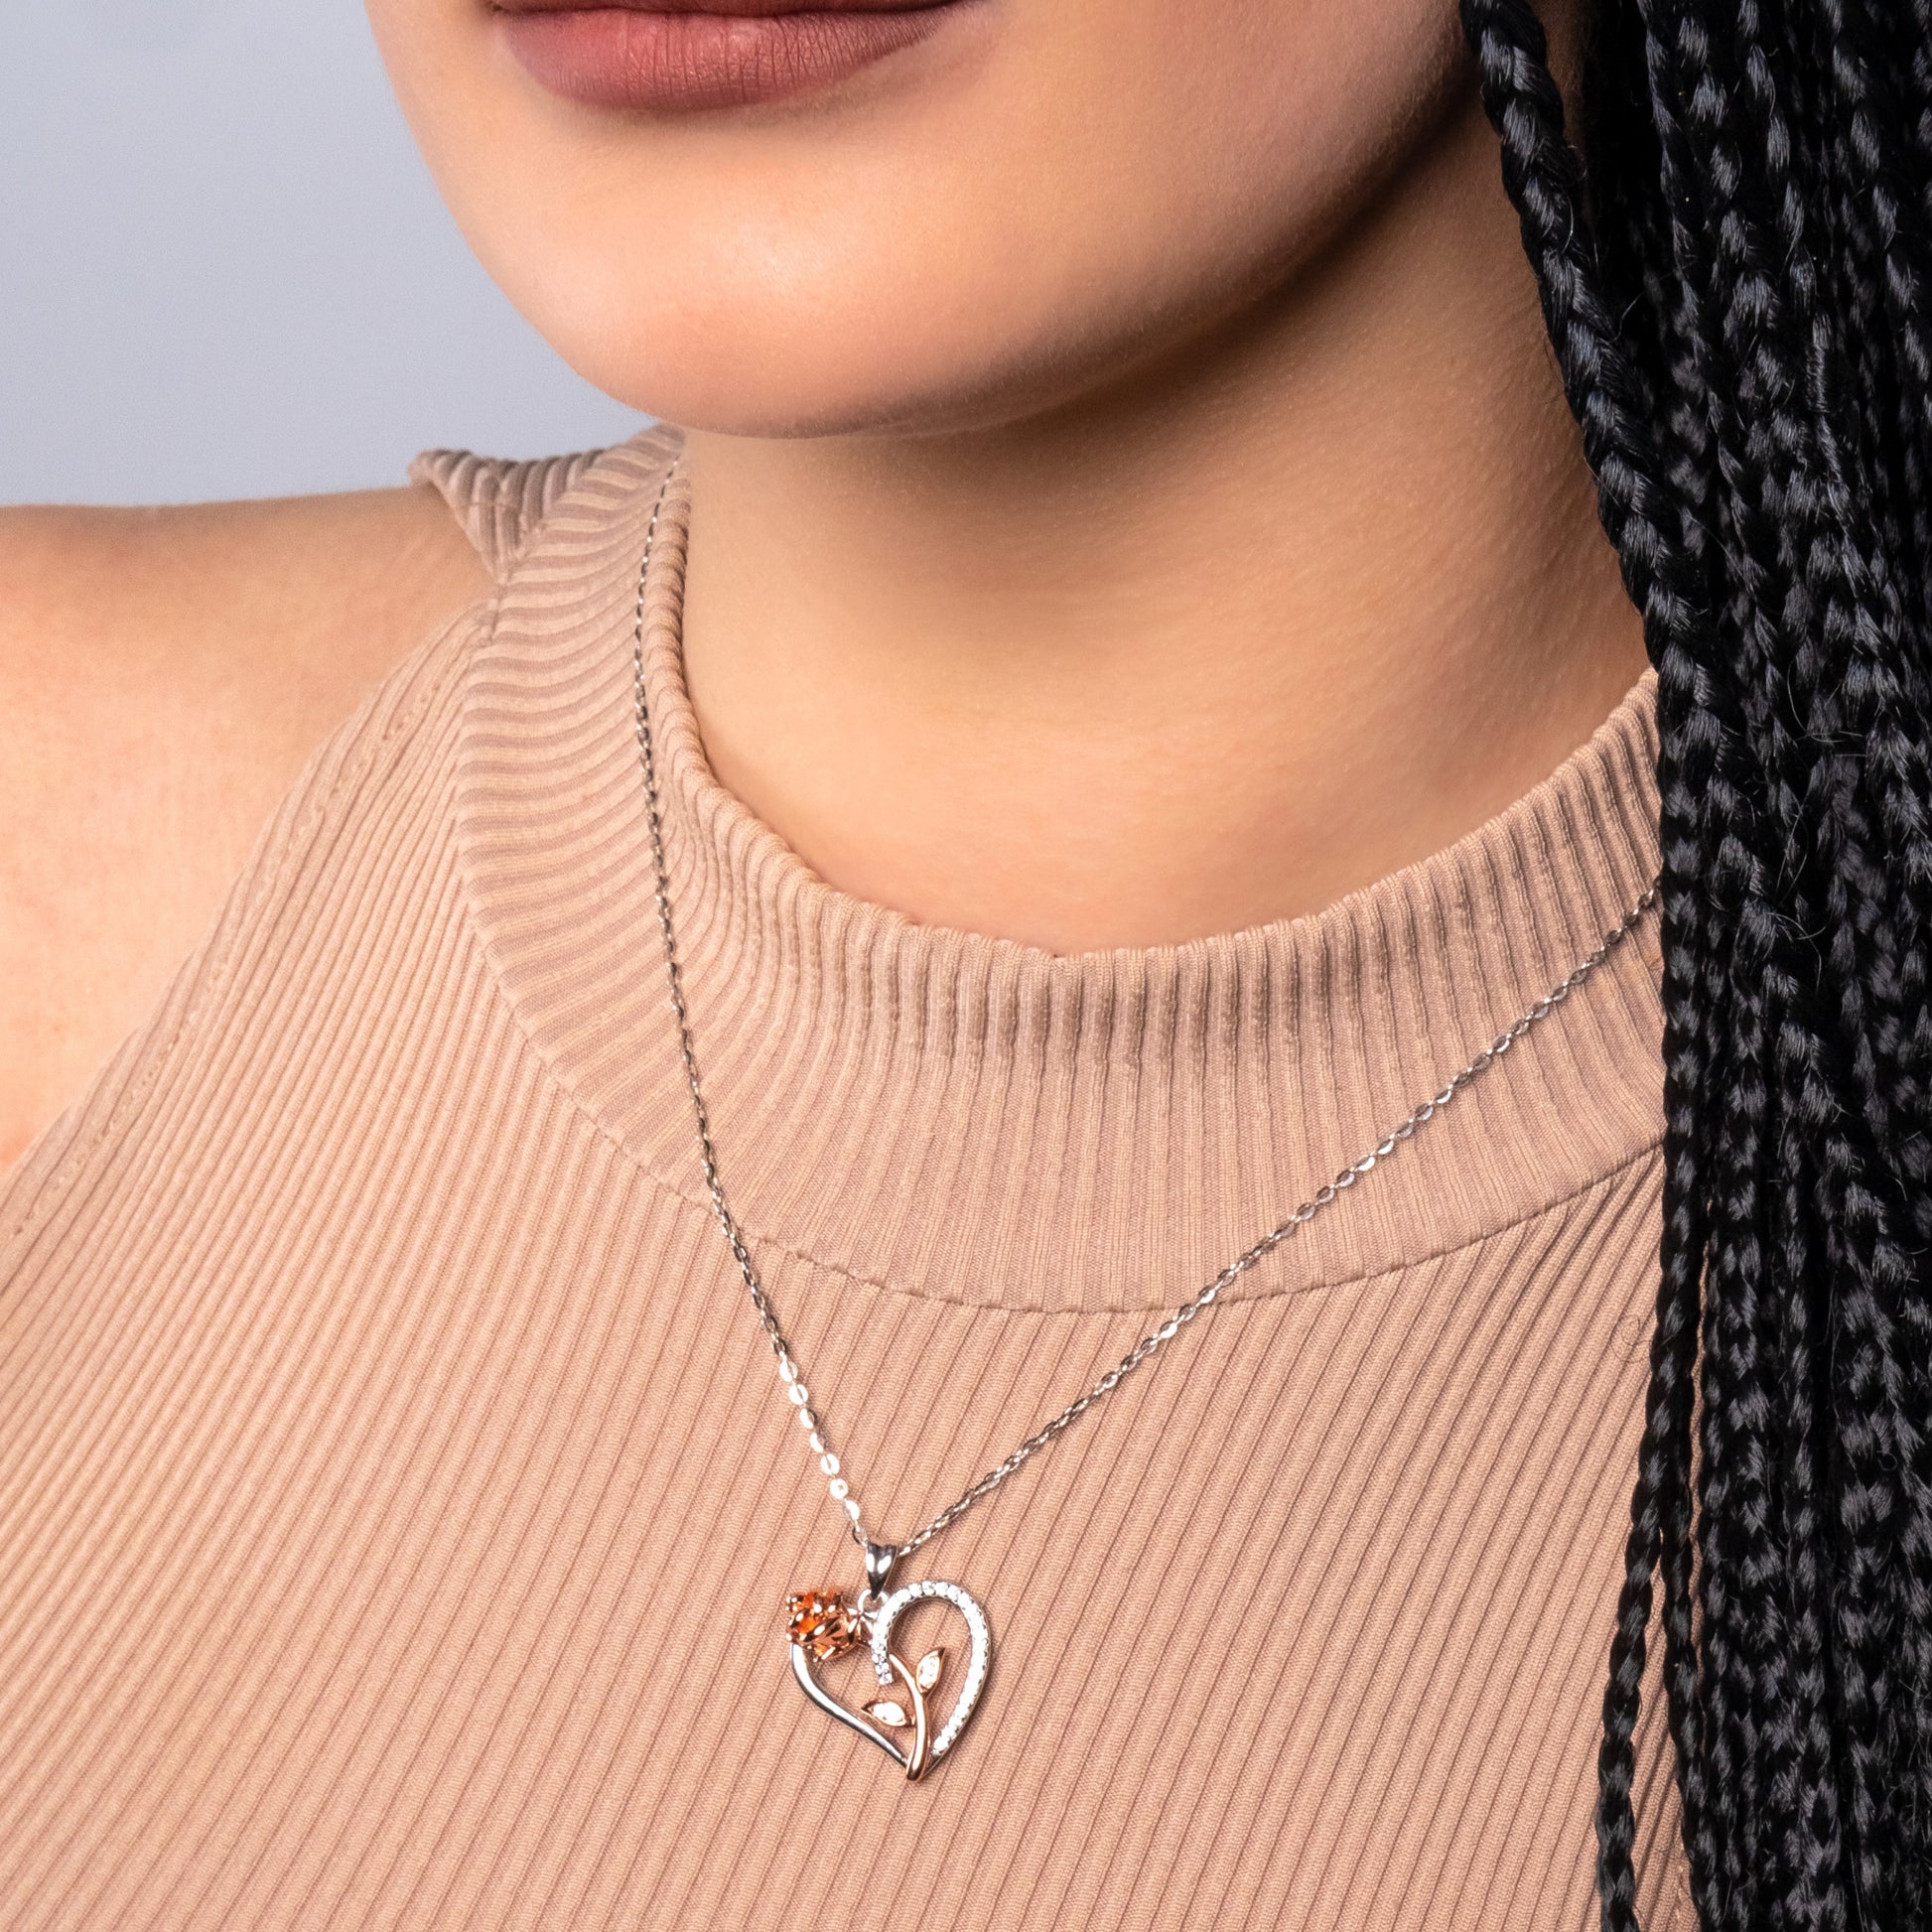 A model wearing 925 Sterling Silver Rose in the Heart Crystal Pendant with 925 Sterling Silver Flat Cable Necklace on her neck